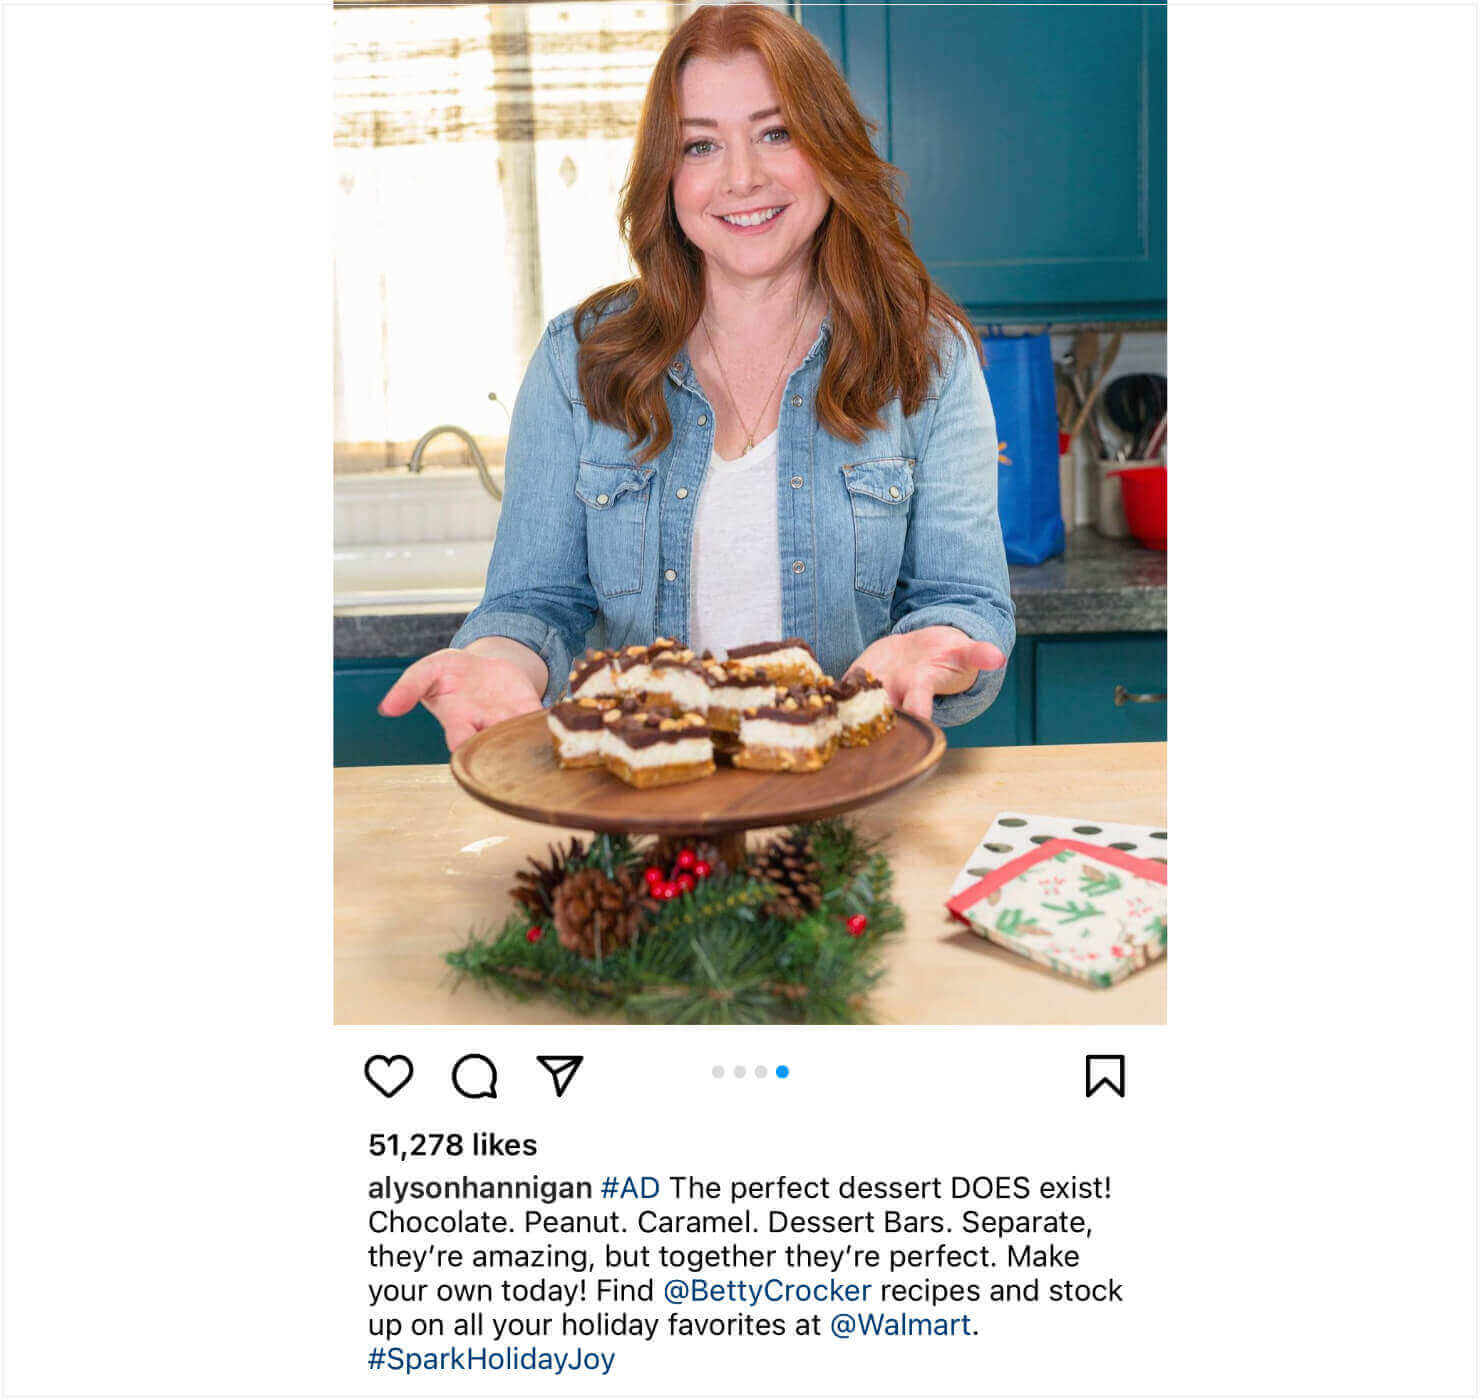 Instagram post from actress Alyson Hannigan. The photo shows her with a platter of a dessert. Text says: "alysonhannigan #AD The perfect dessert DOES exist! Chocolate. Peanut. Caramel. Dessert Bars. Separate, they're amazing, but together they're perfect. Make your own today! Find @BettyCrocker recipes and stock up on all your holiday favorites at @Walmart. #SparkHolidayJoy"